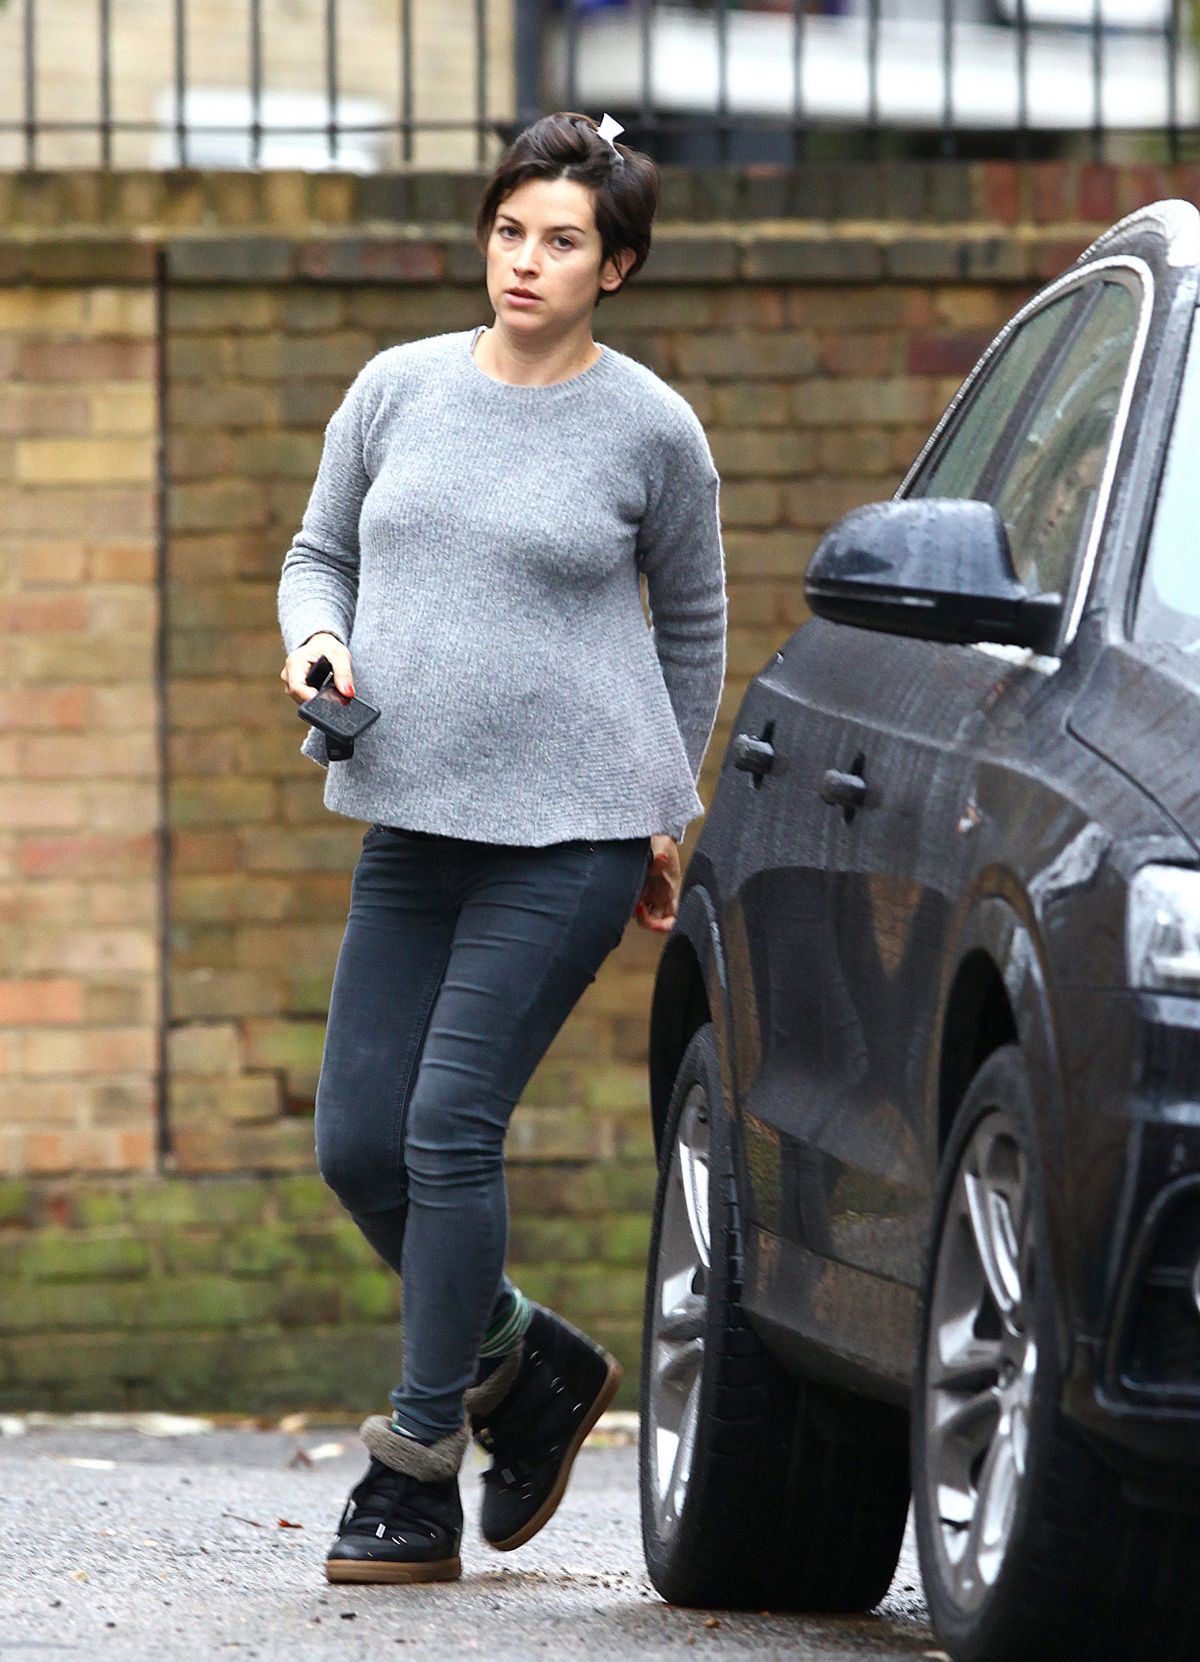 AMELIA WARNER Out and About in Notting Hill 11/24/2015